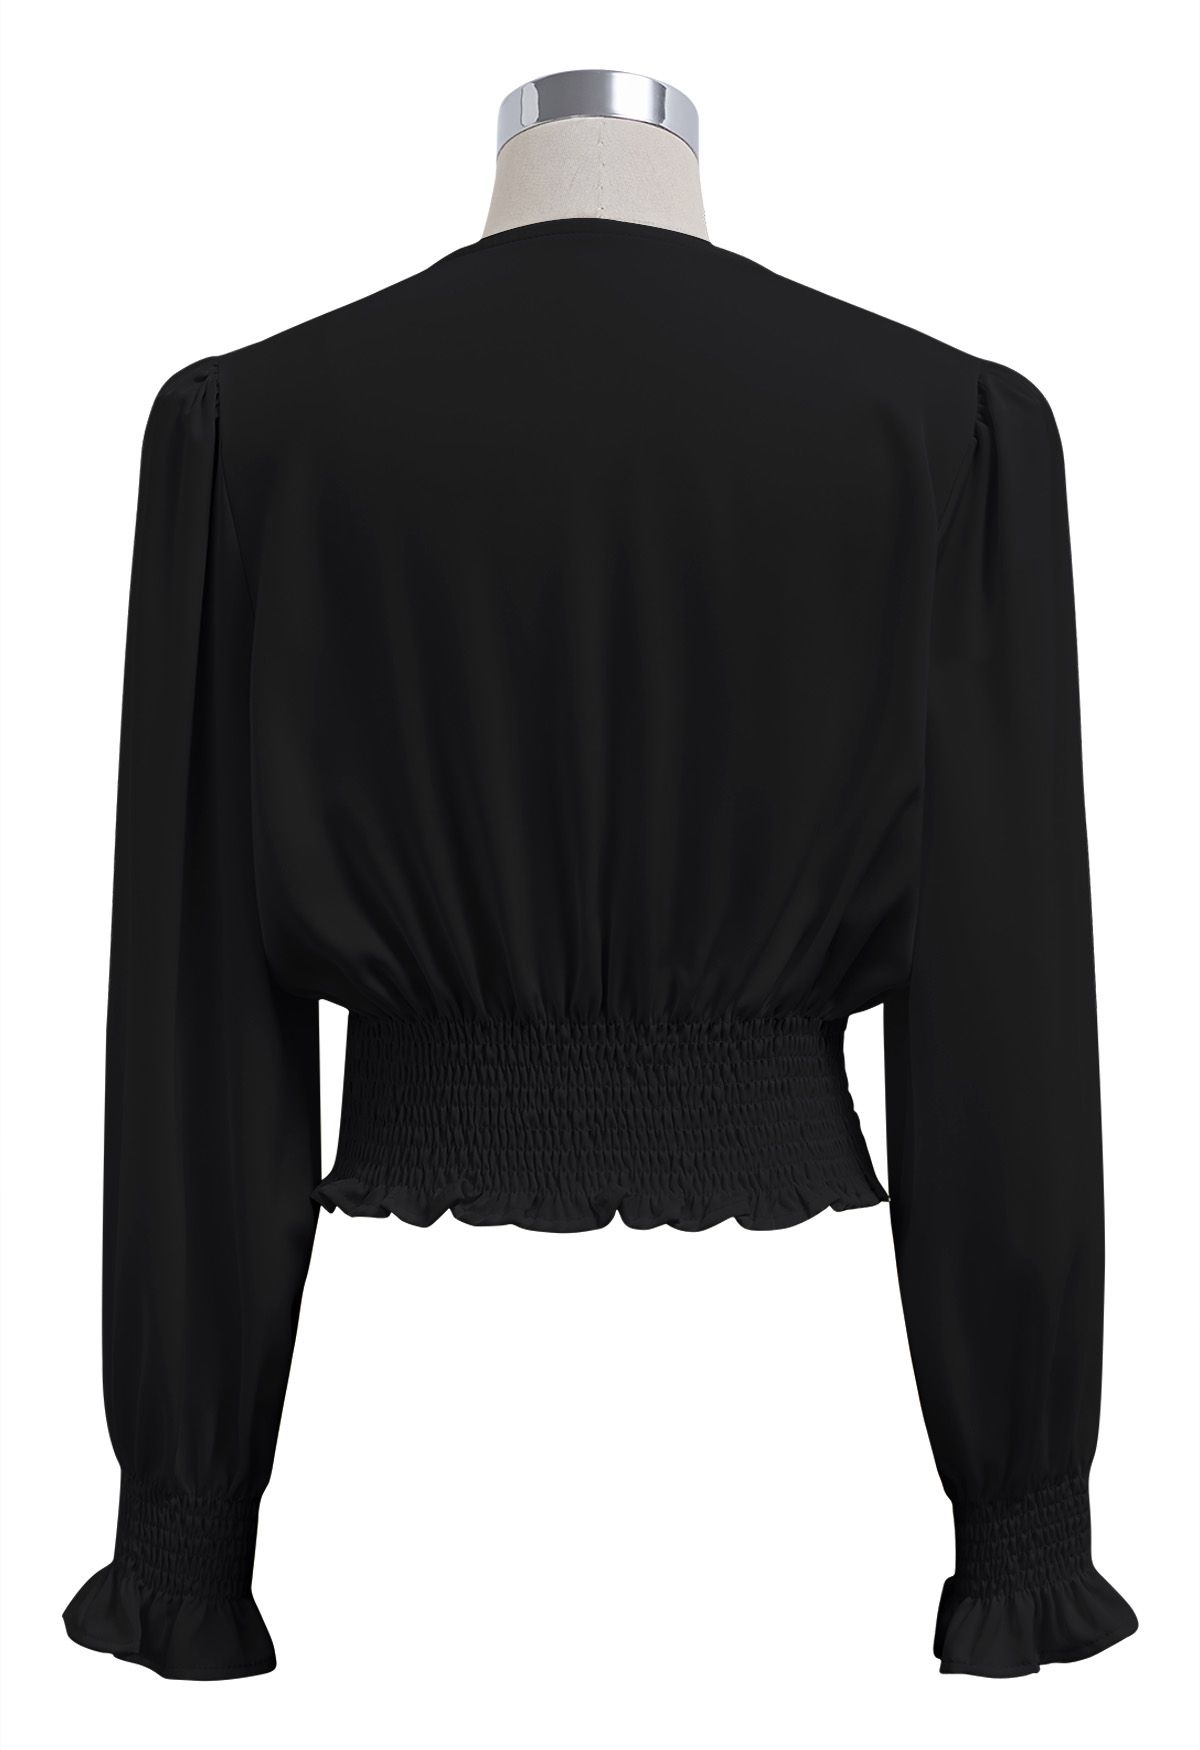 Satin Finish V-Neck Puff Sleeves Crop Top in Black